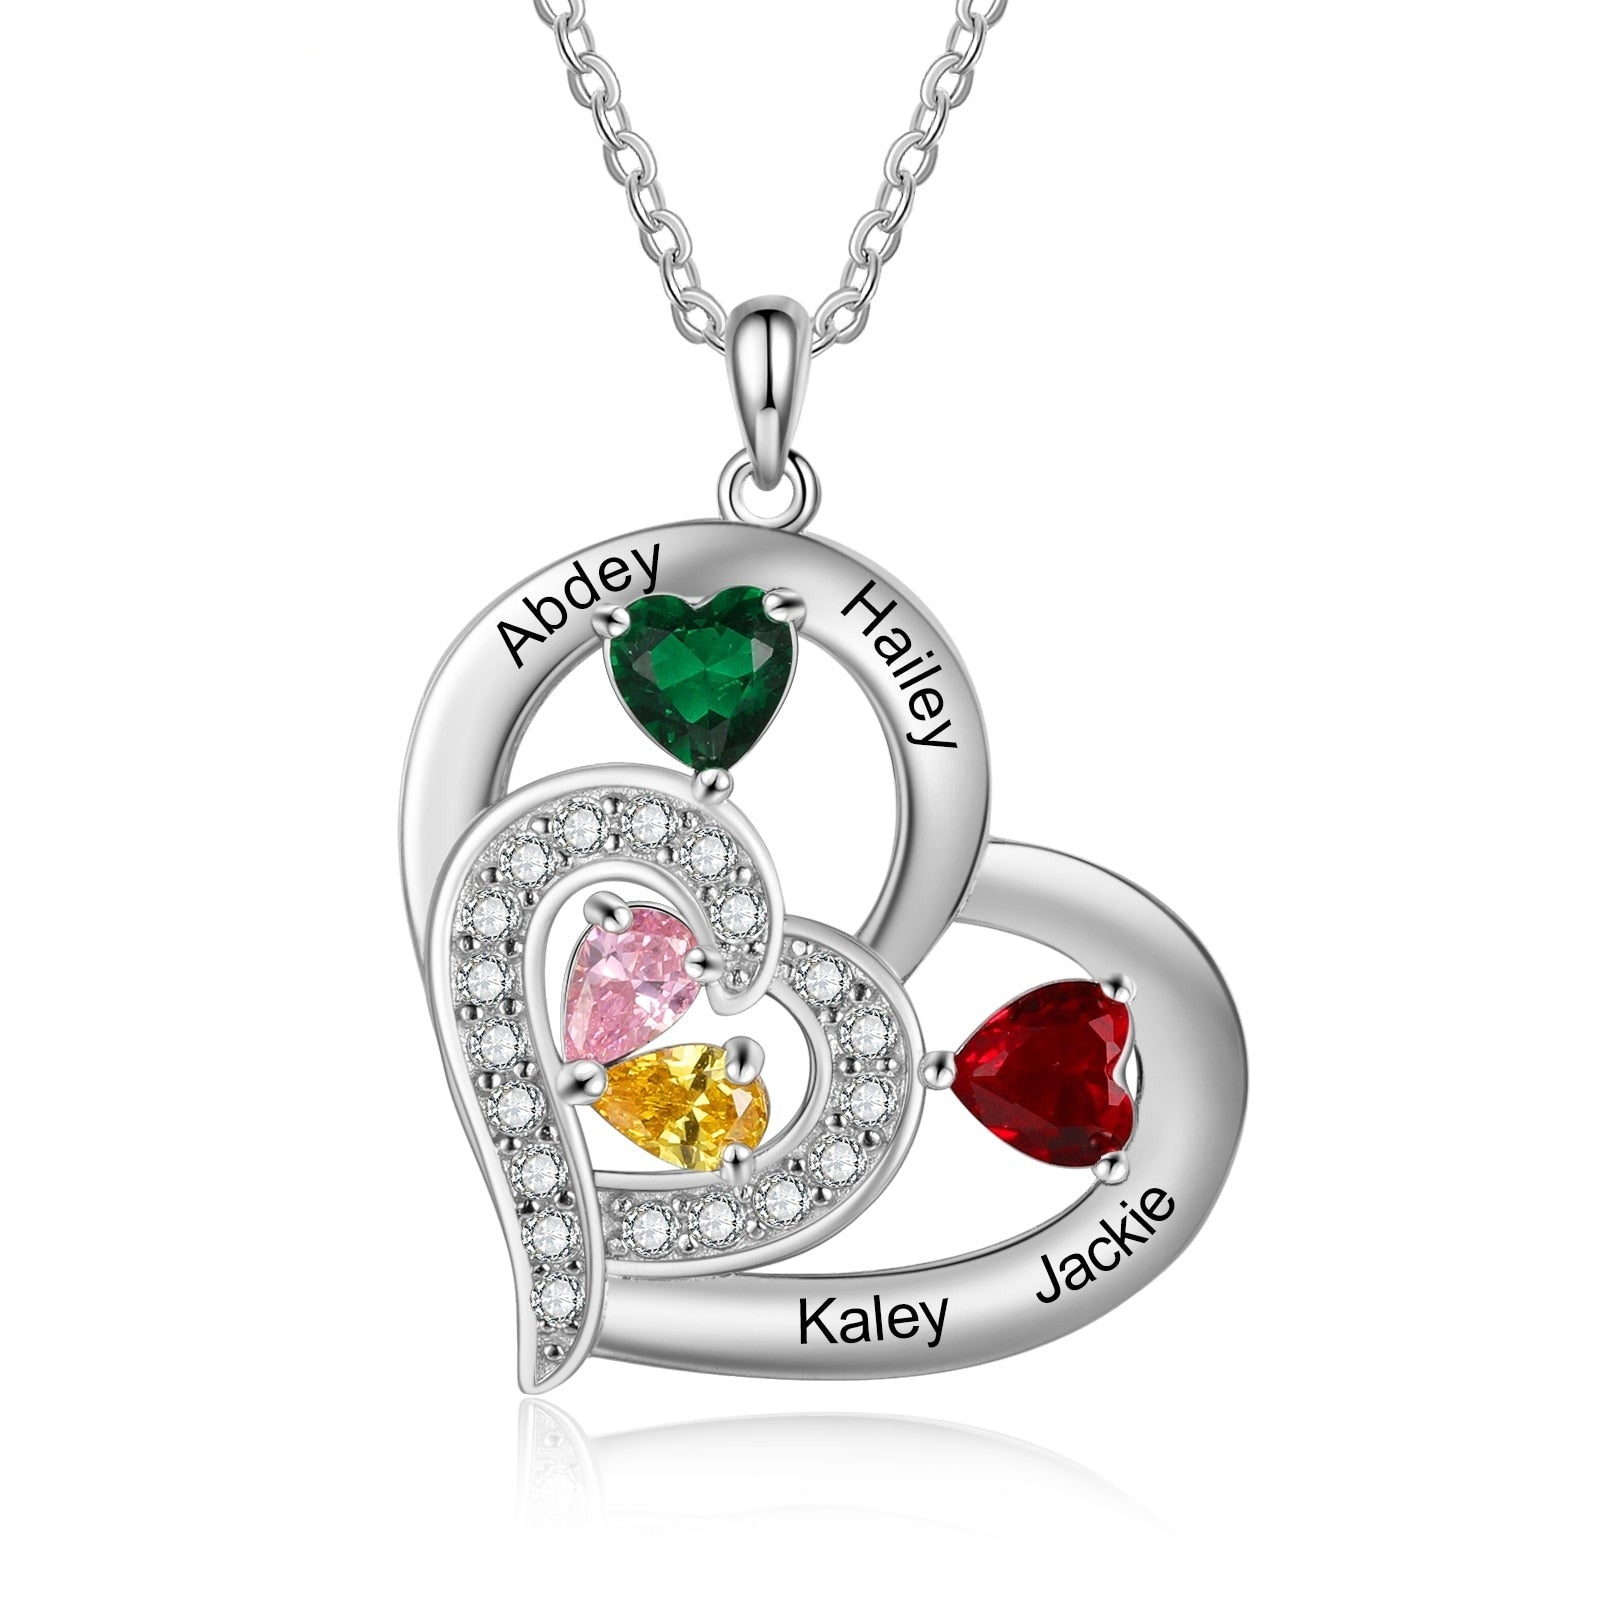 Damofy Custom Engraved Heart Name Necklace with Birthstones Personalized Heart Pendant Gift Jewelry for Her 